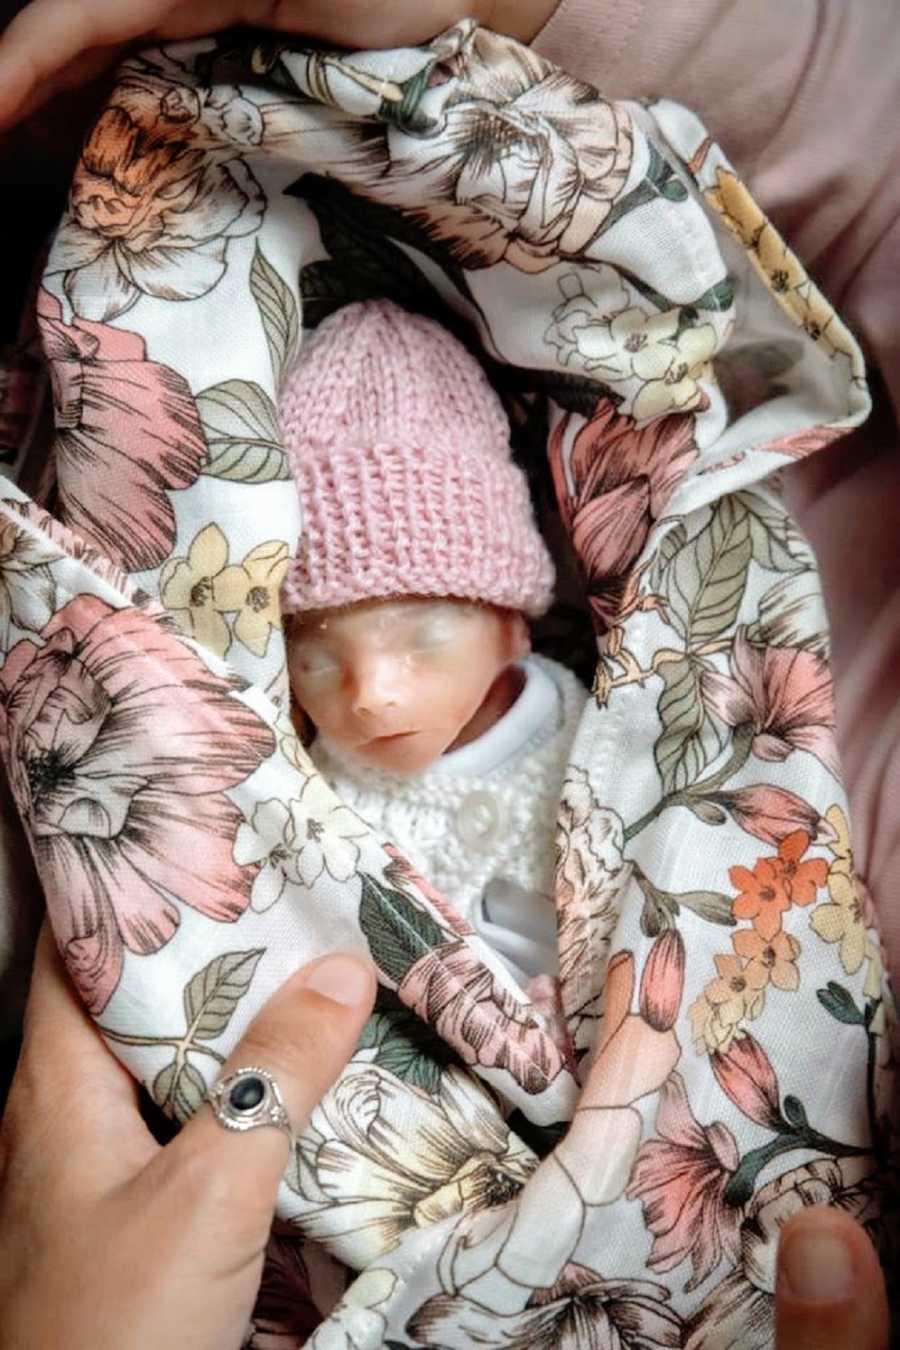 An infant baby girl who is deceased